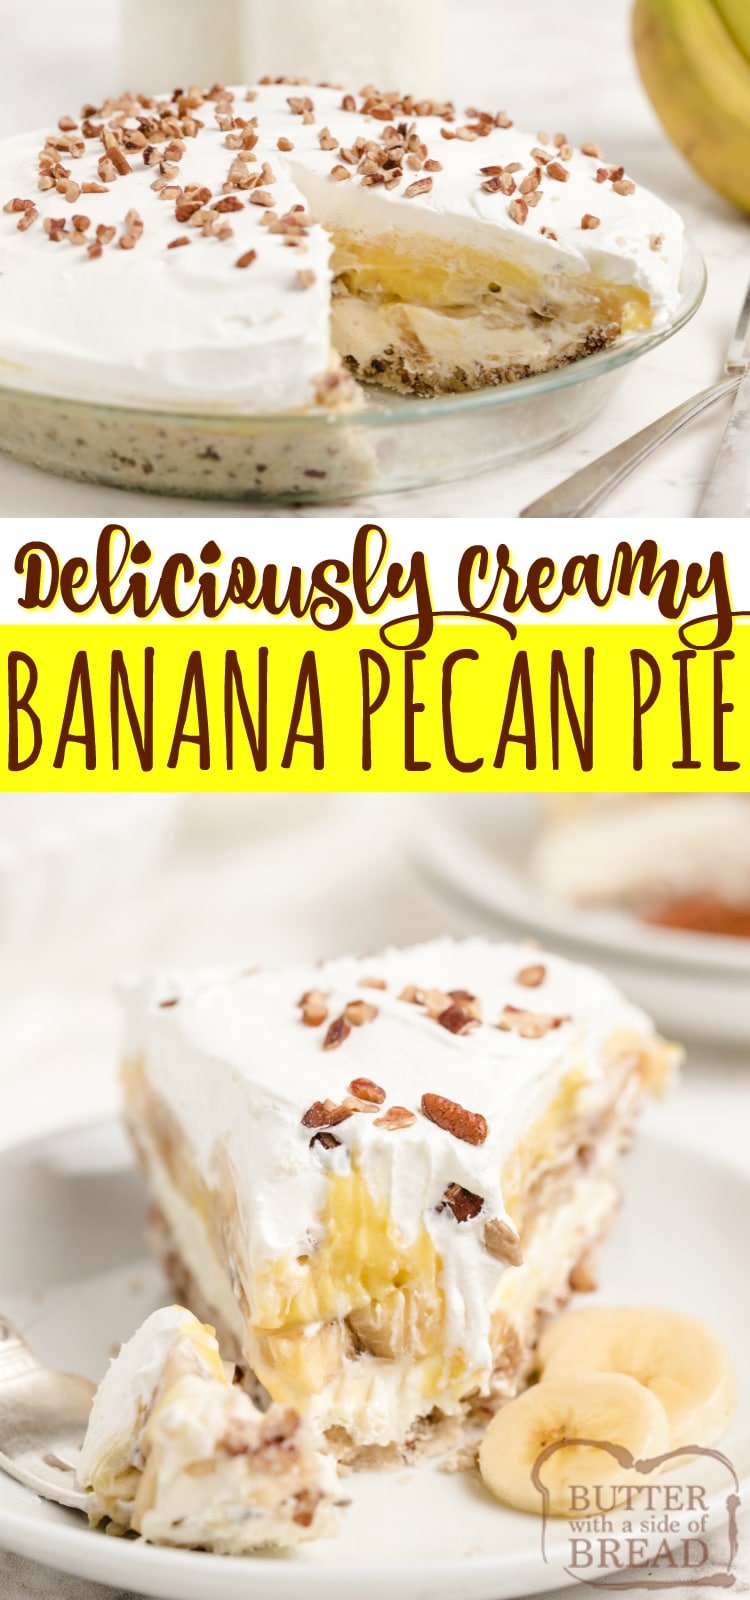 Butter Pecan Banana Cream Pie combines two classic pies into one delicious dessert! This simple banana pie recipe is made in a pecan crust, with fresh bananas sandwiched between two creamy layers.